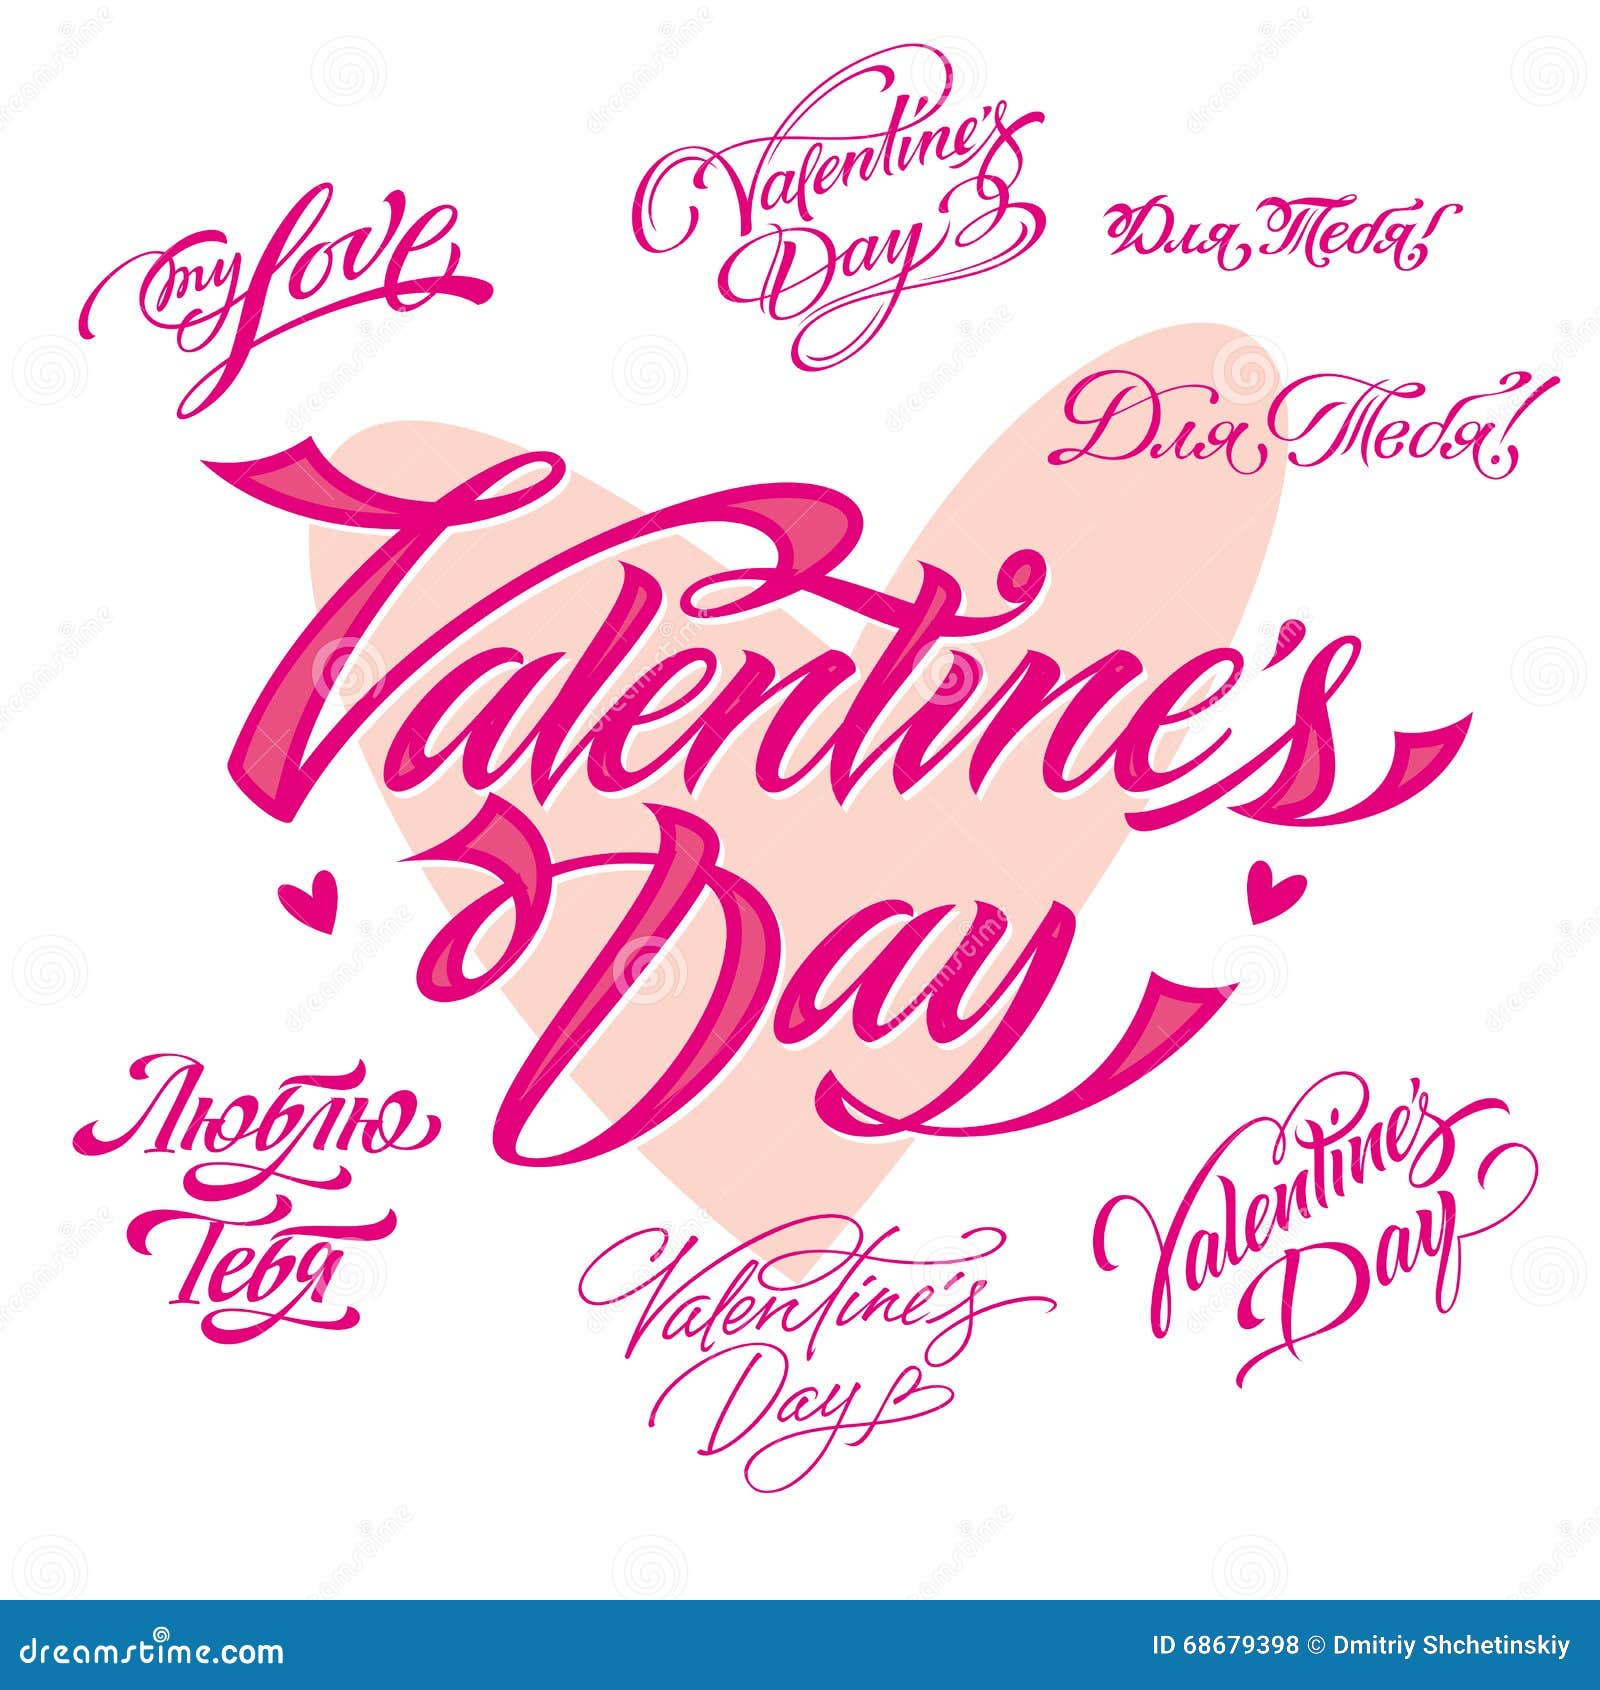 Top 90+ Images happy valentines day written in different styles Completed